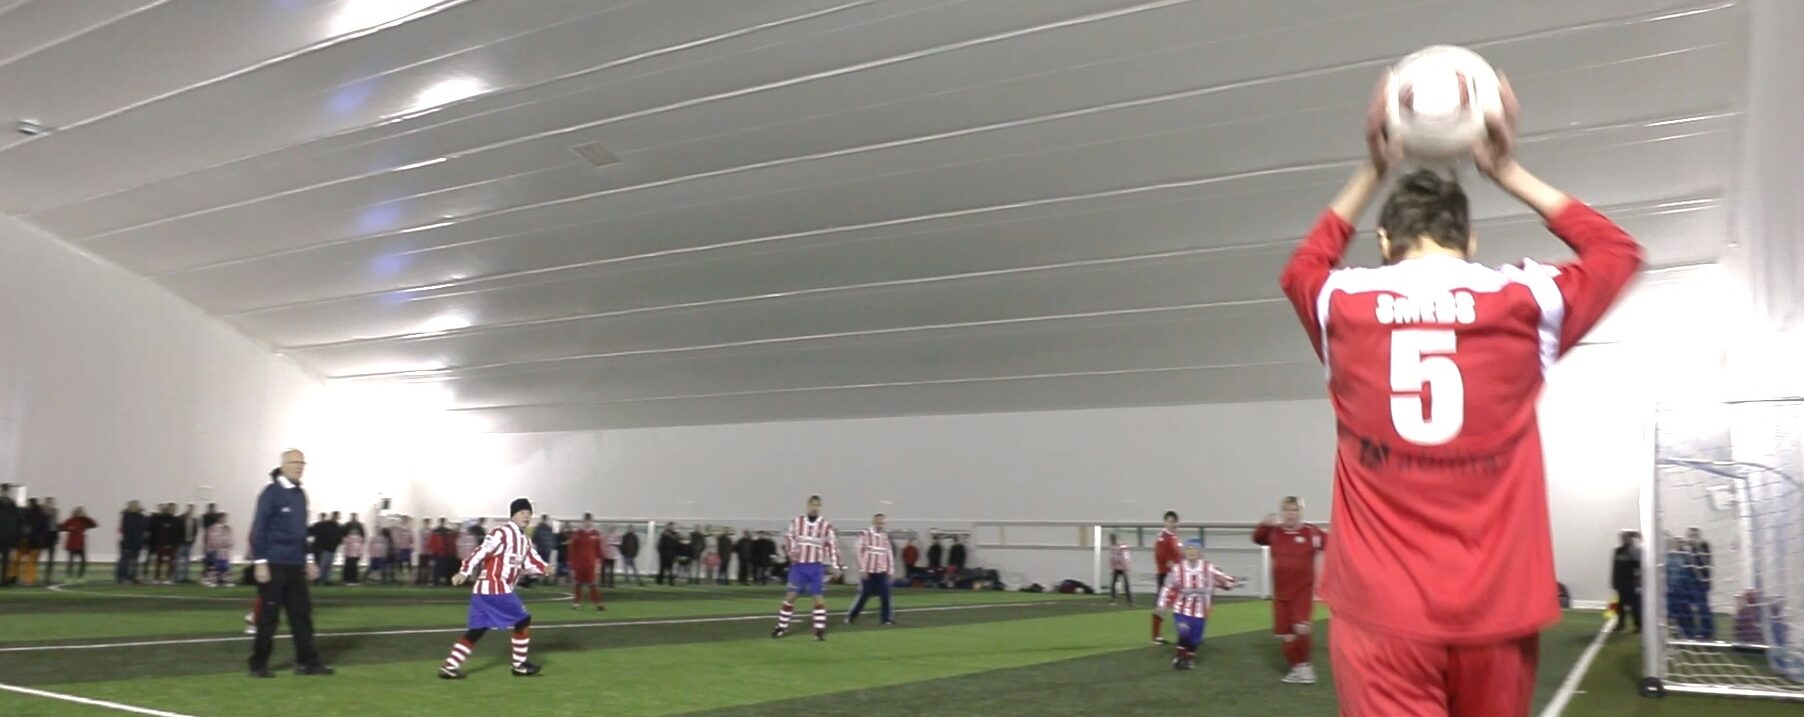 Kids playing indoor football with sports canopy roof